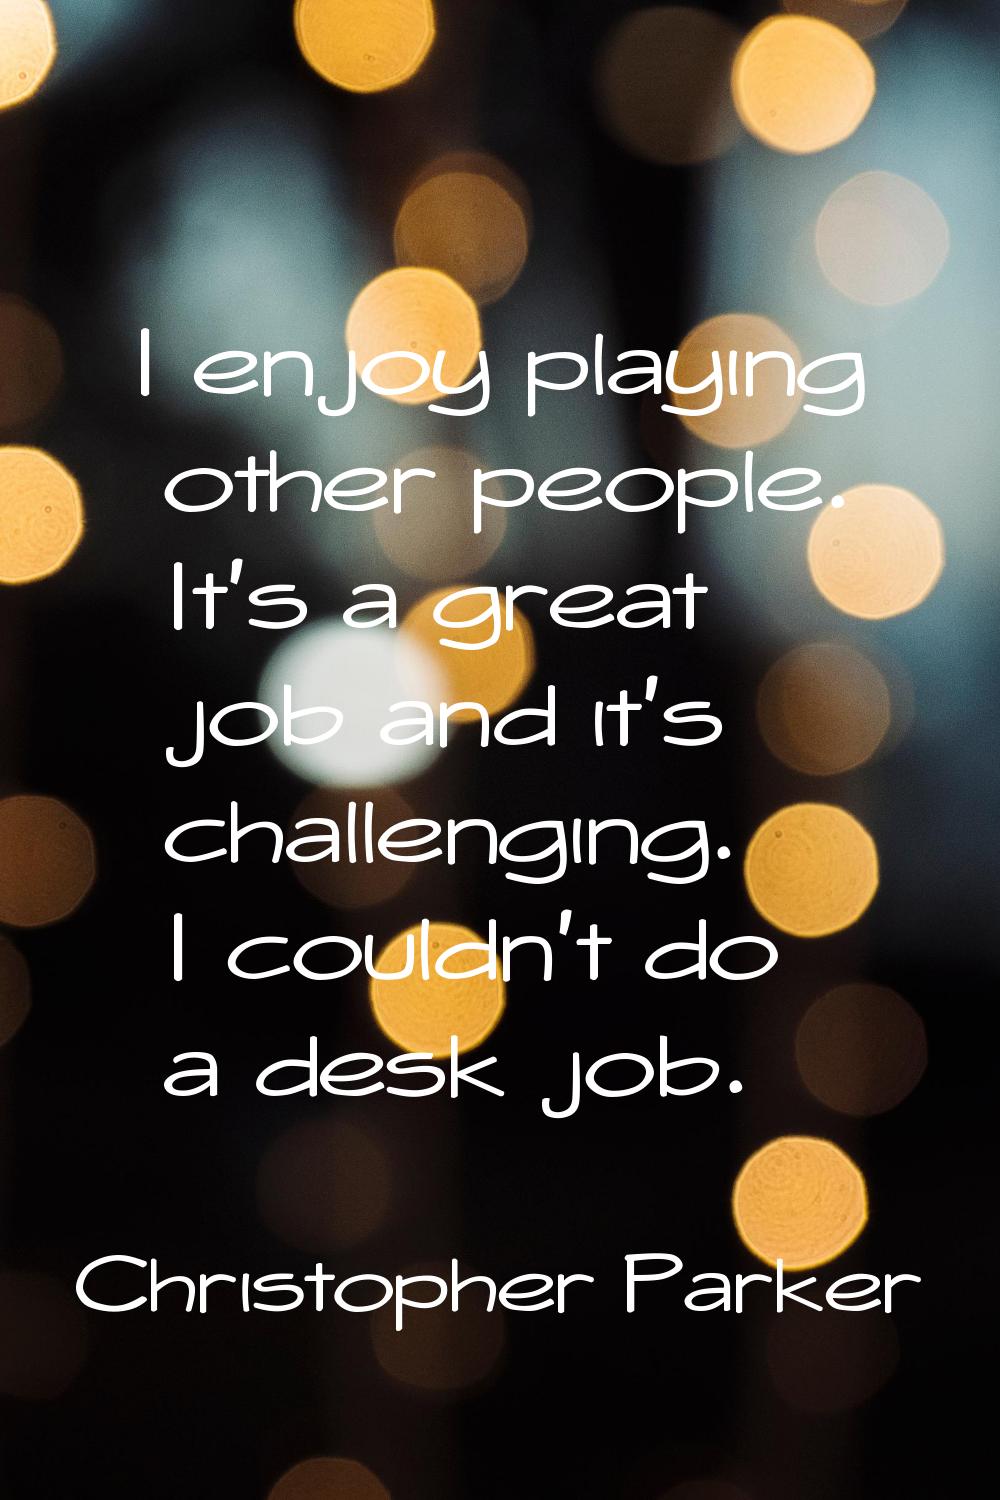 I enjoy playing other people. It's a great job and it's challenging. I couldn't do a desk job.